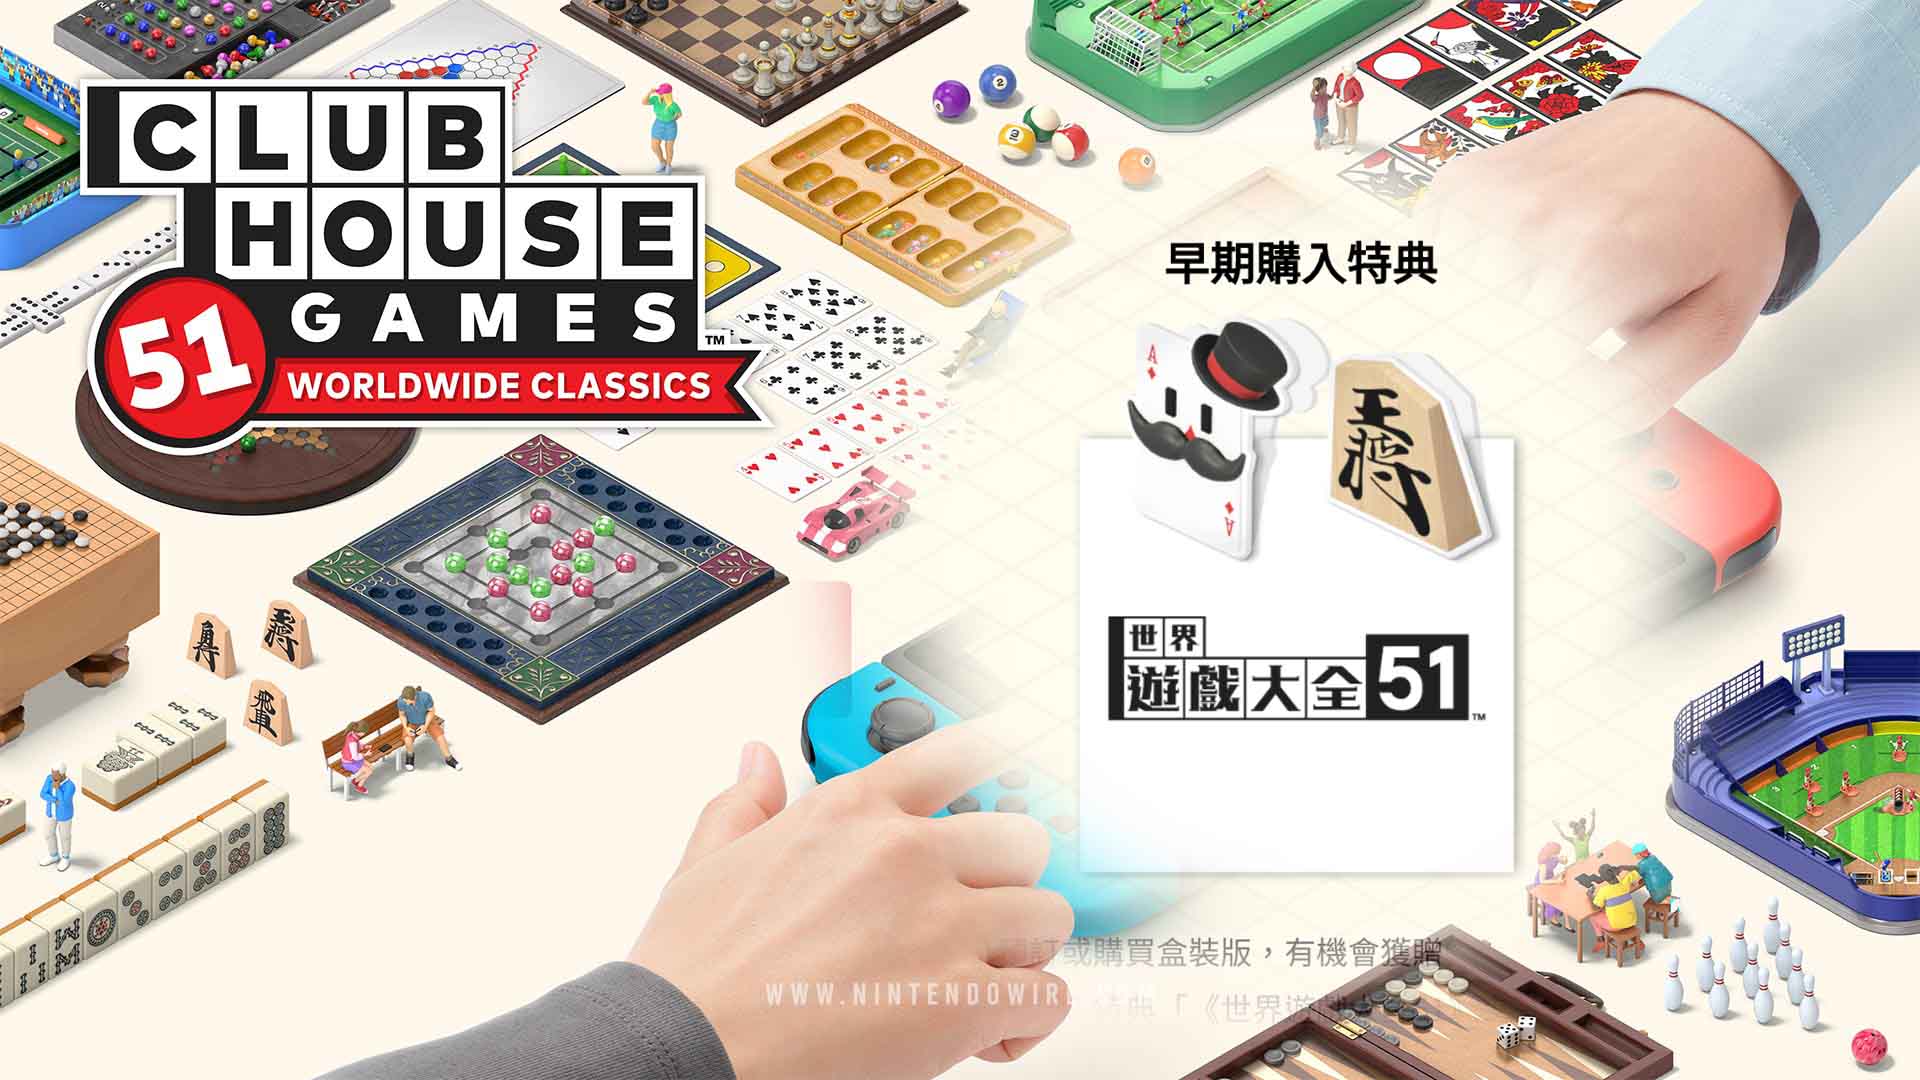 clubhouse games 51 worldwide classics game list